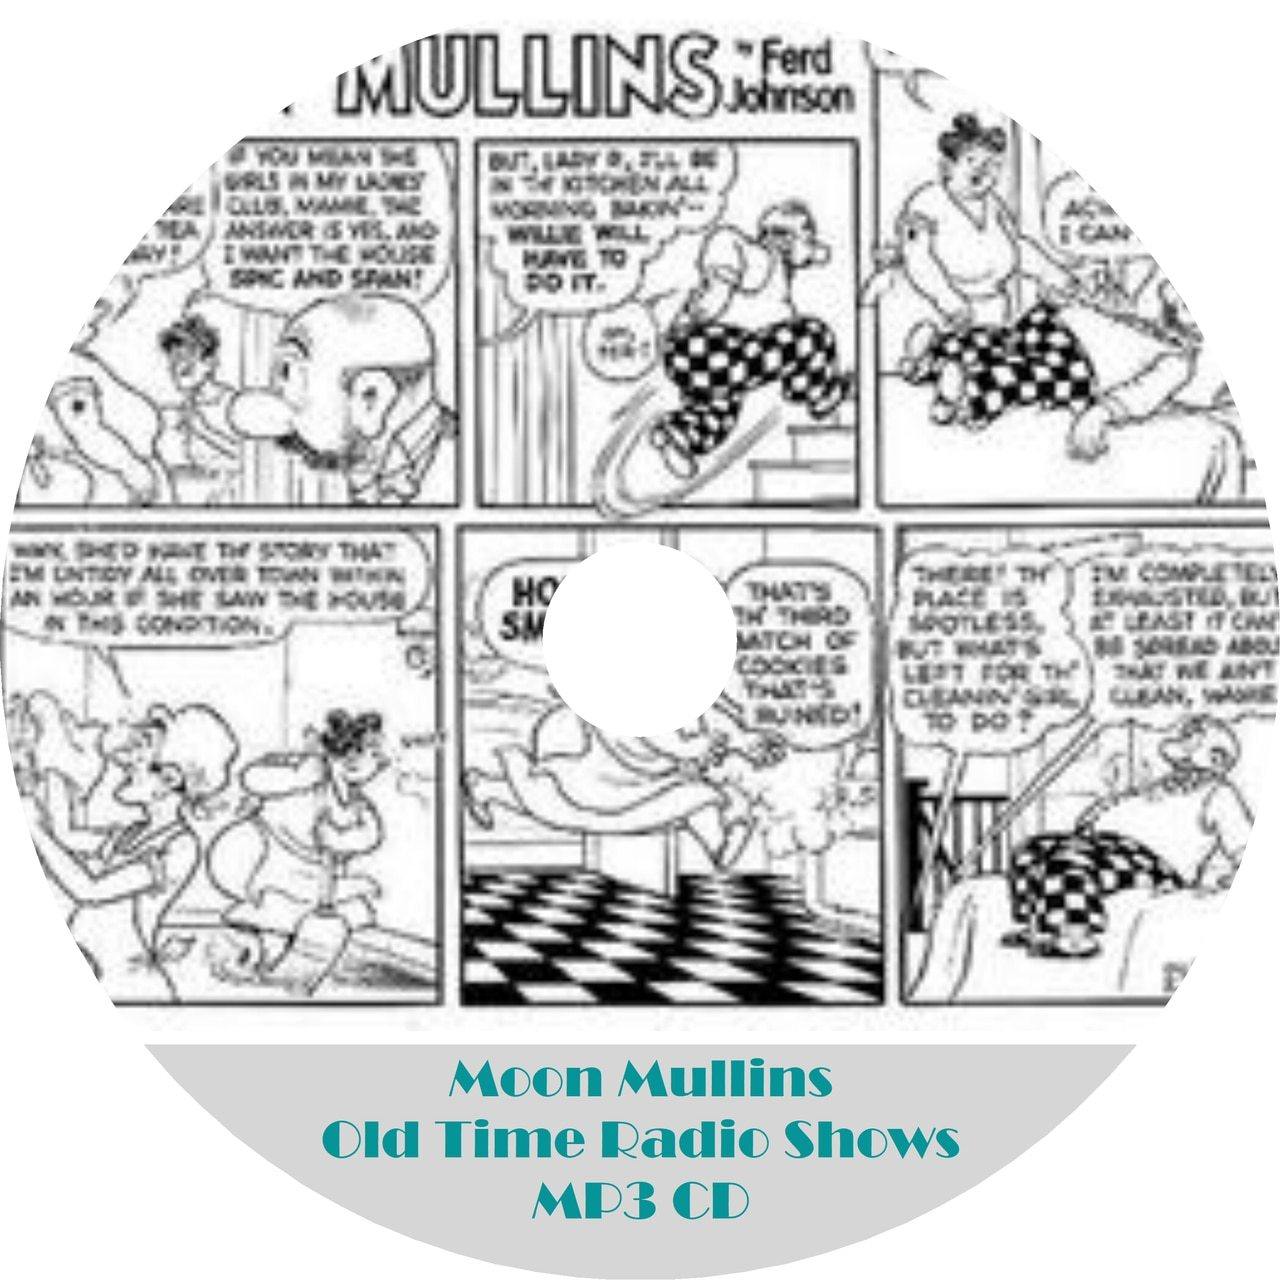 Moon Mullins Old Time Radio Shows 3 Episodes On MP3 CD - OTR World